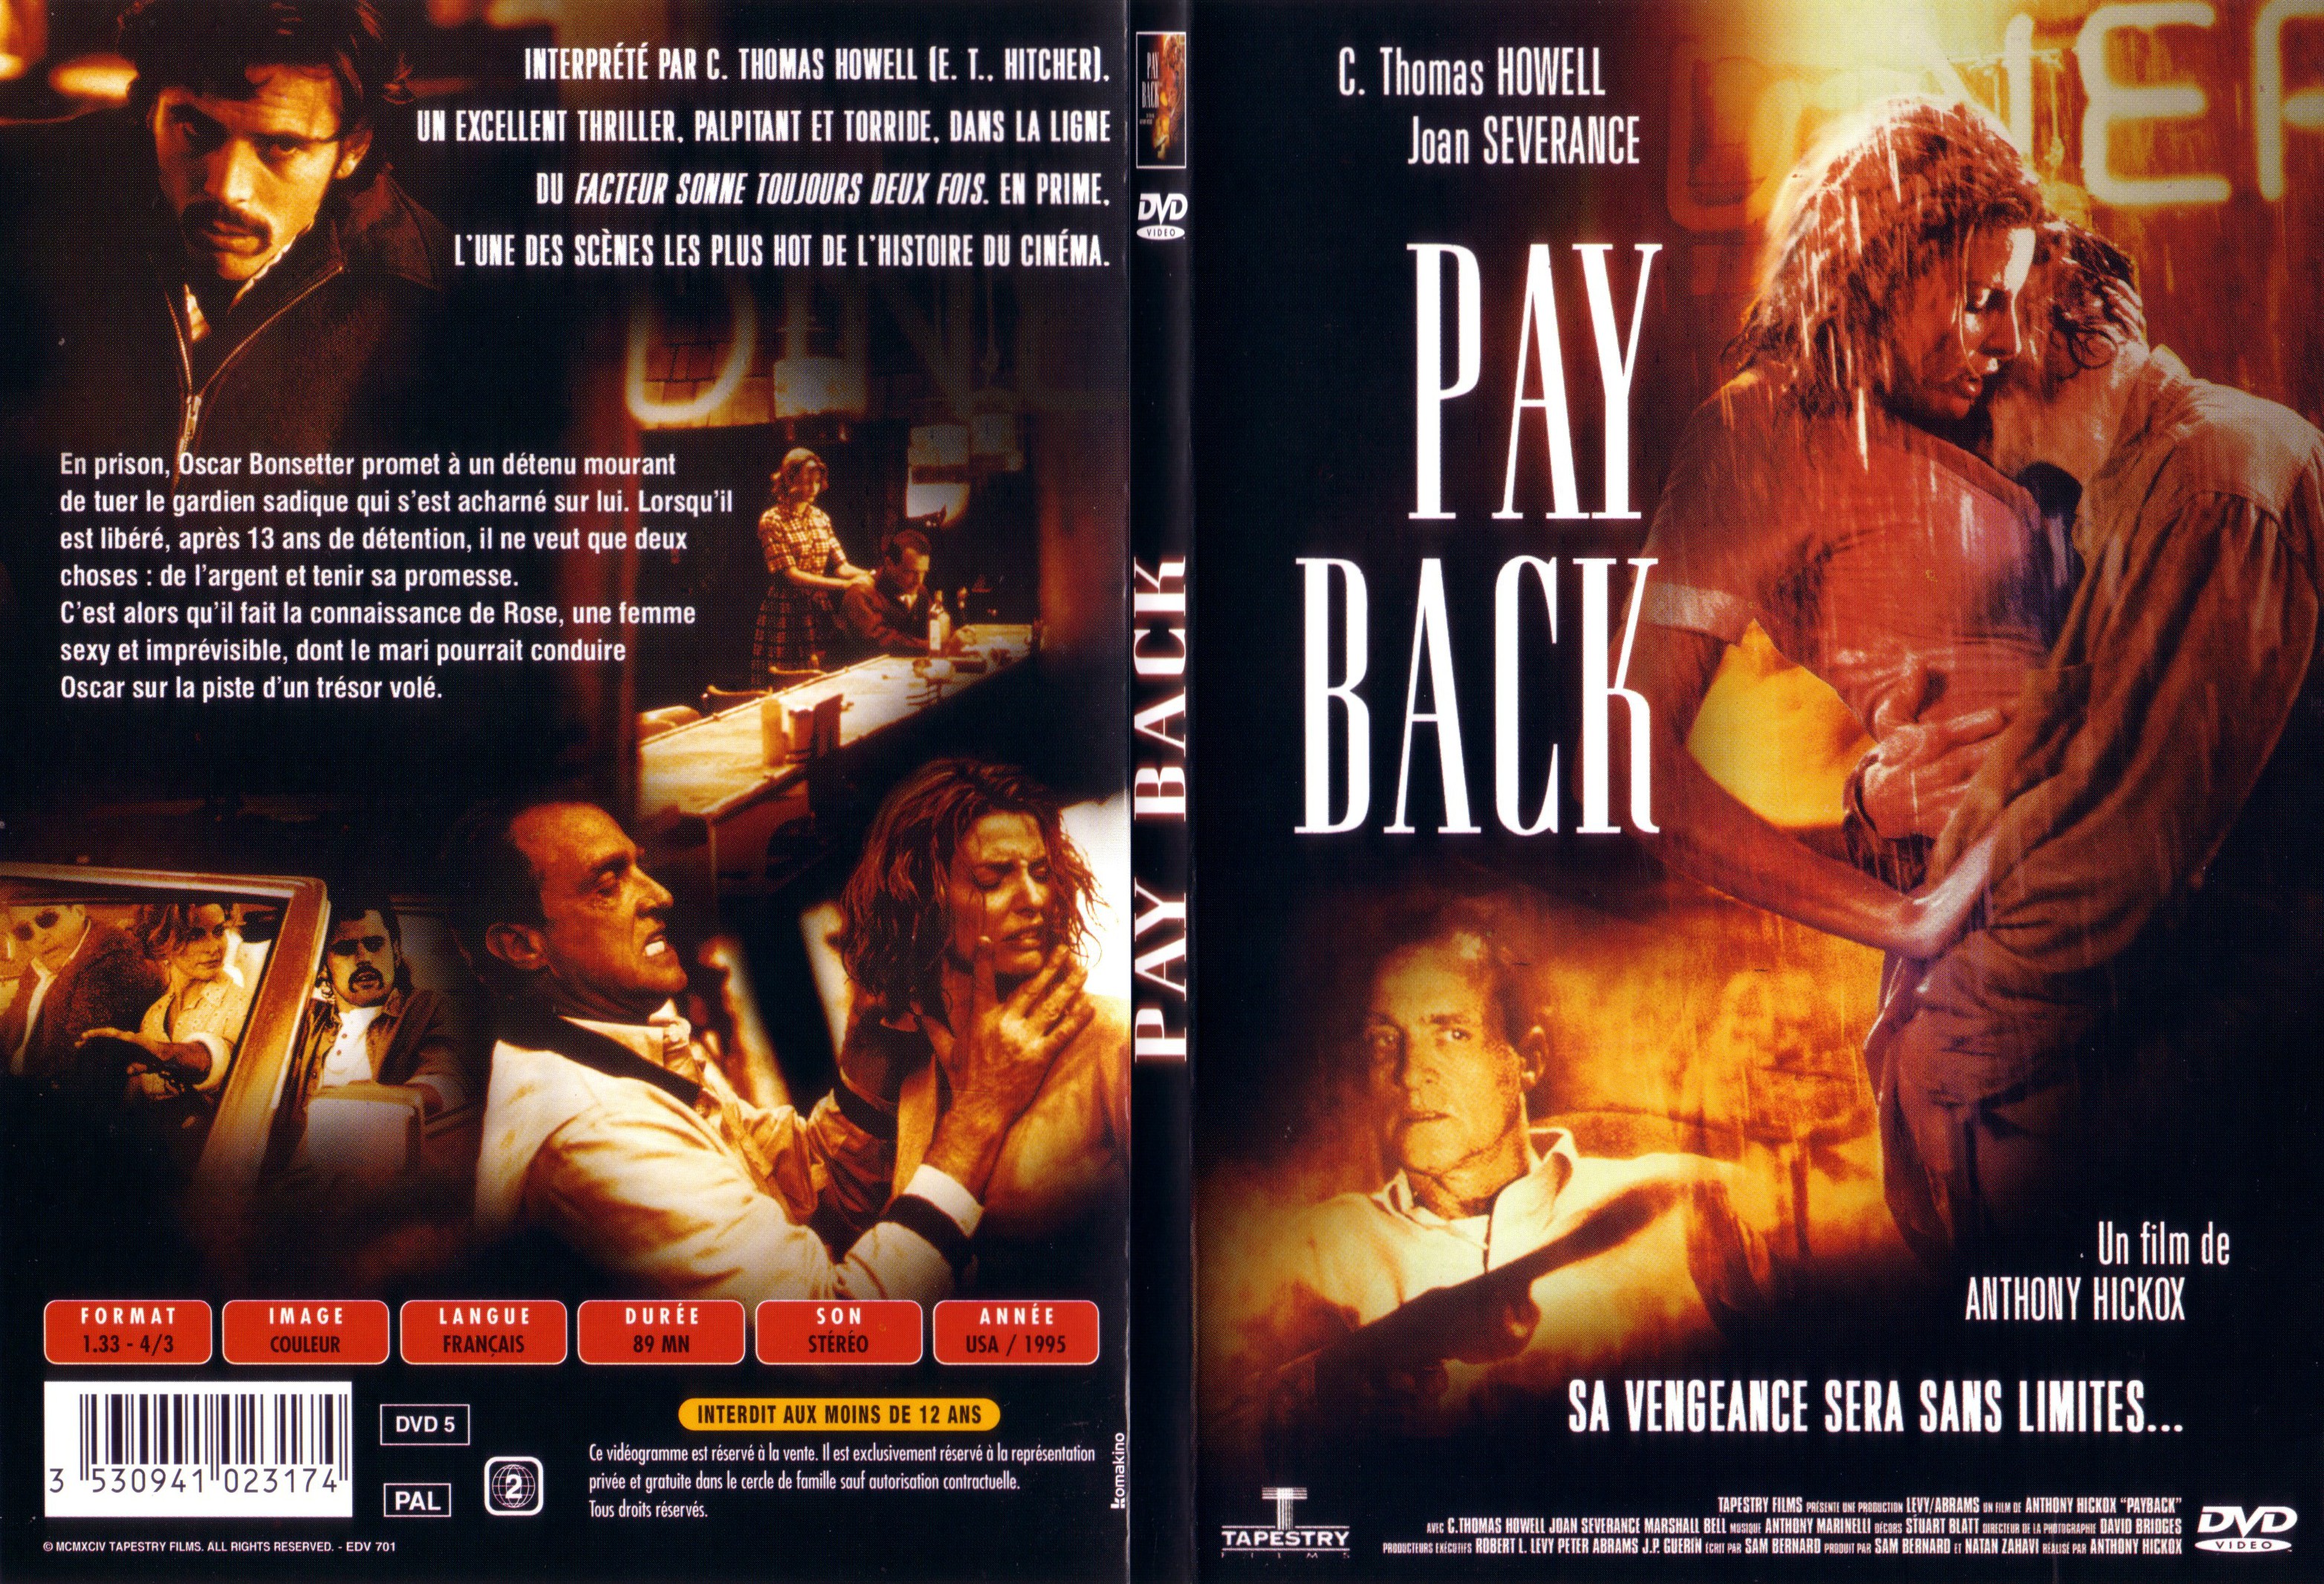 Jaquette DVD Pay back - SLIM